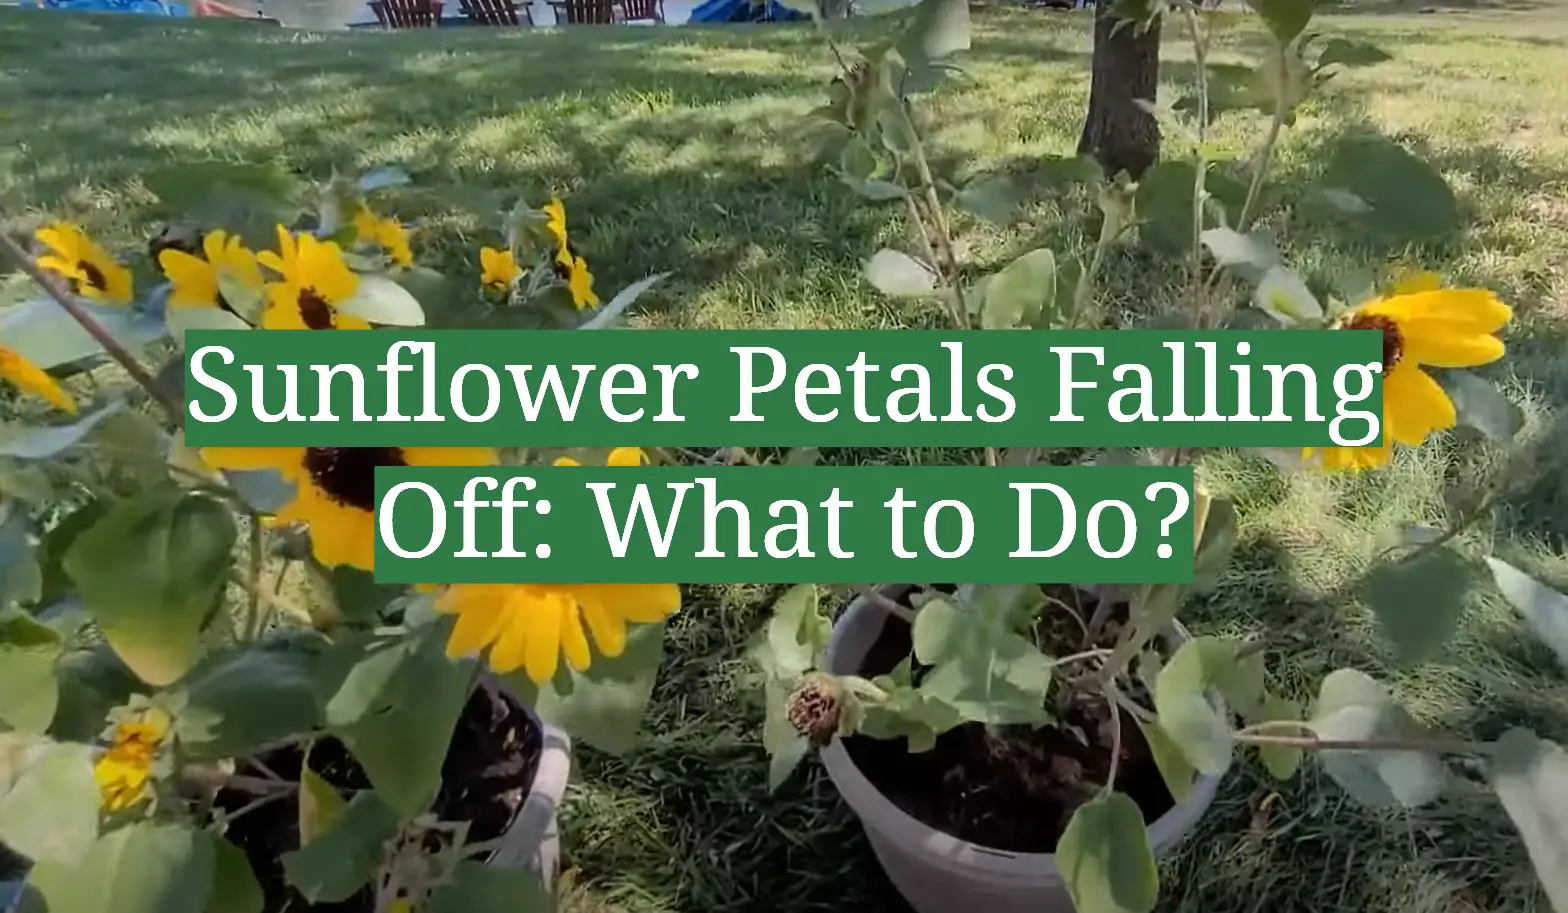 Sunflower Petals Falling Off: What to Do?